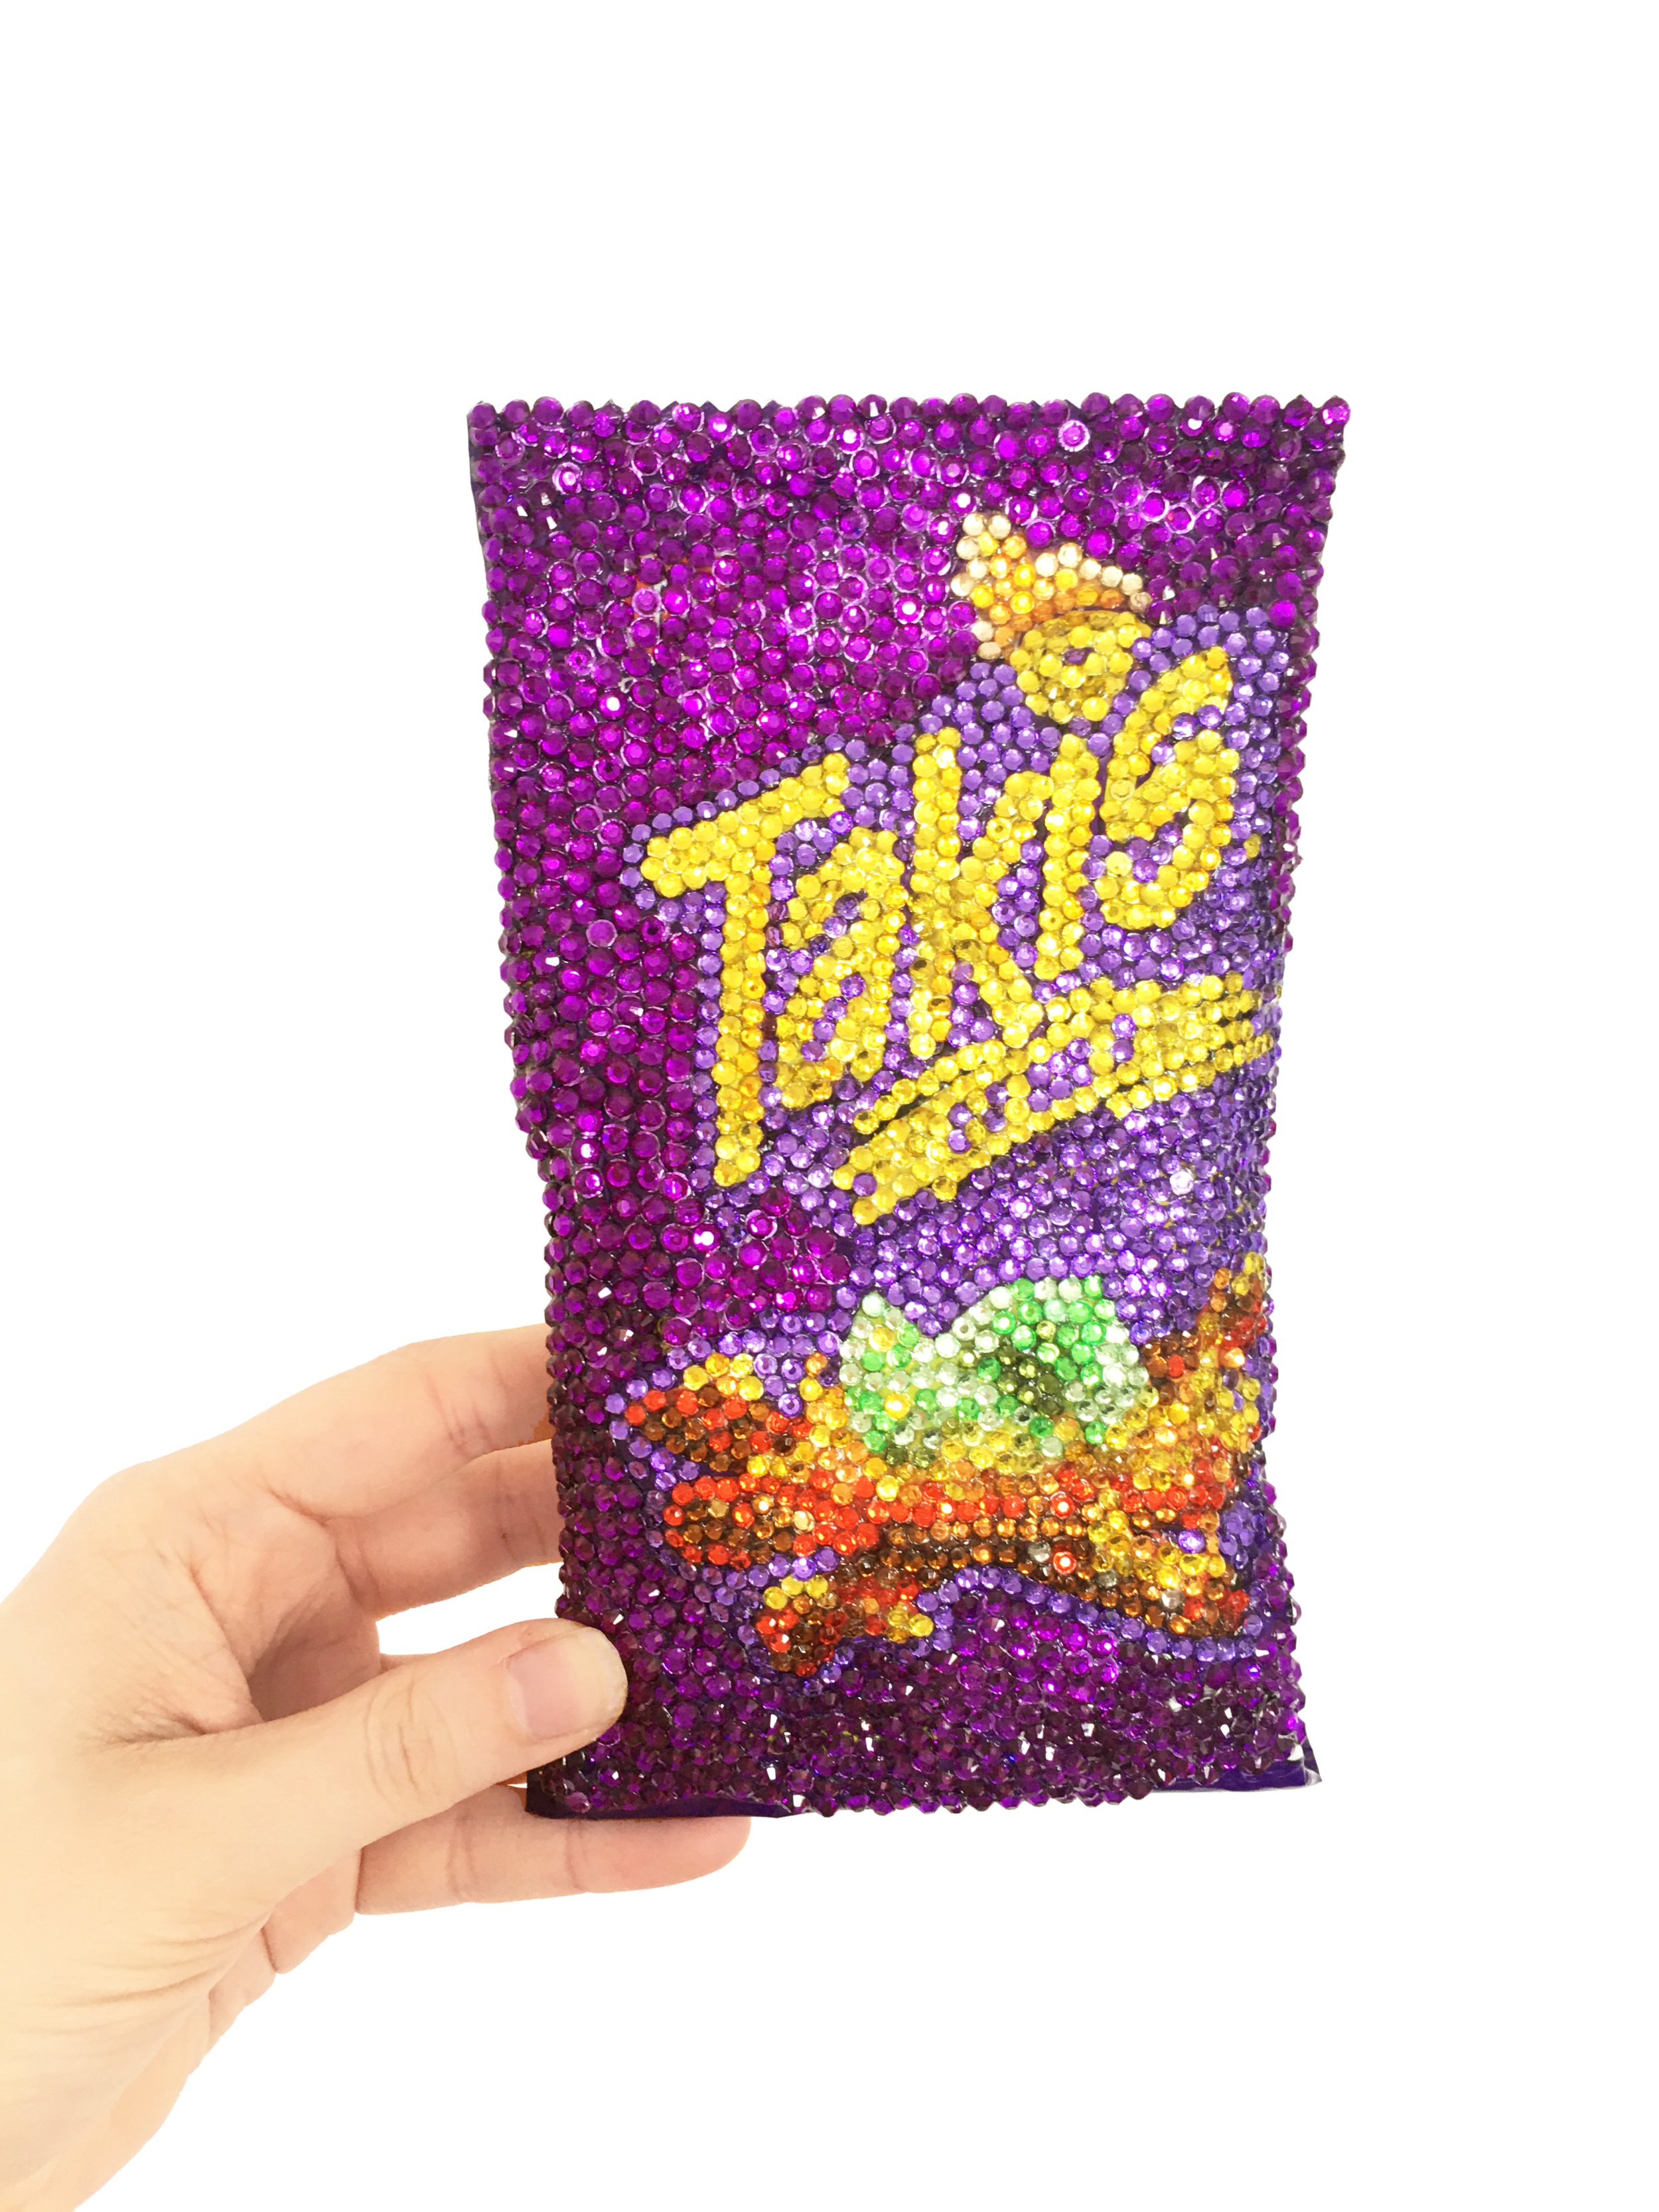 takis.png